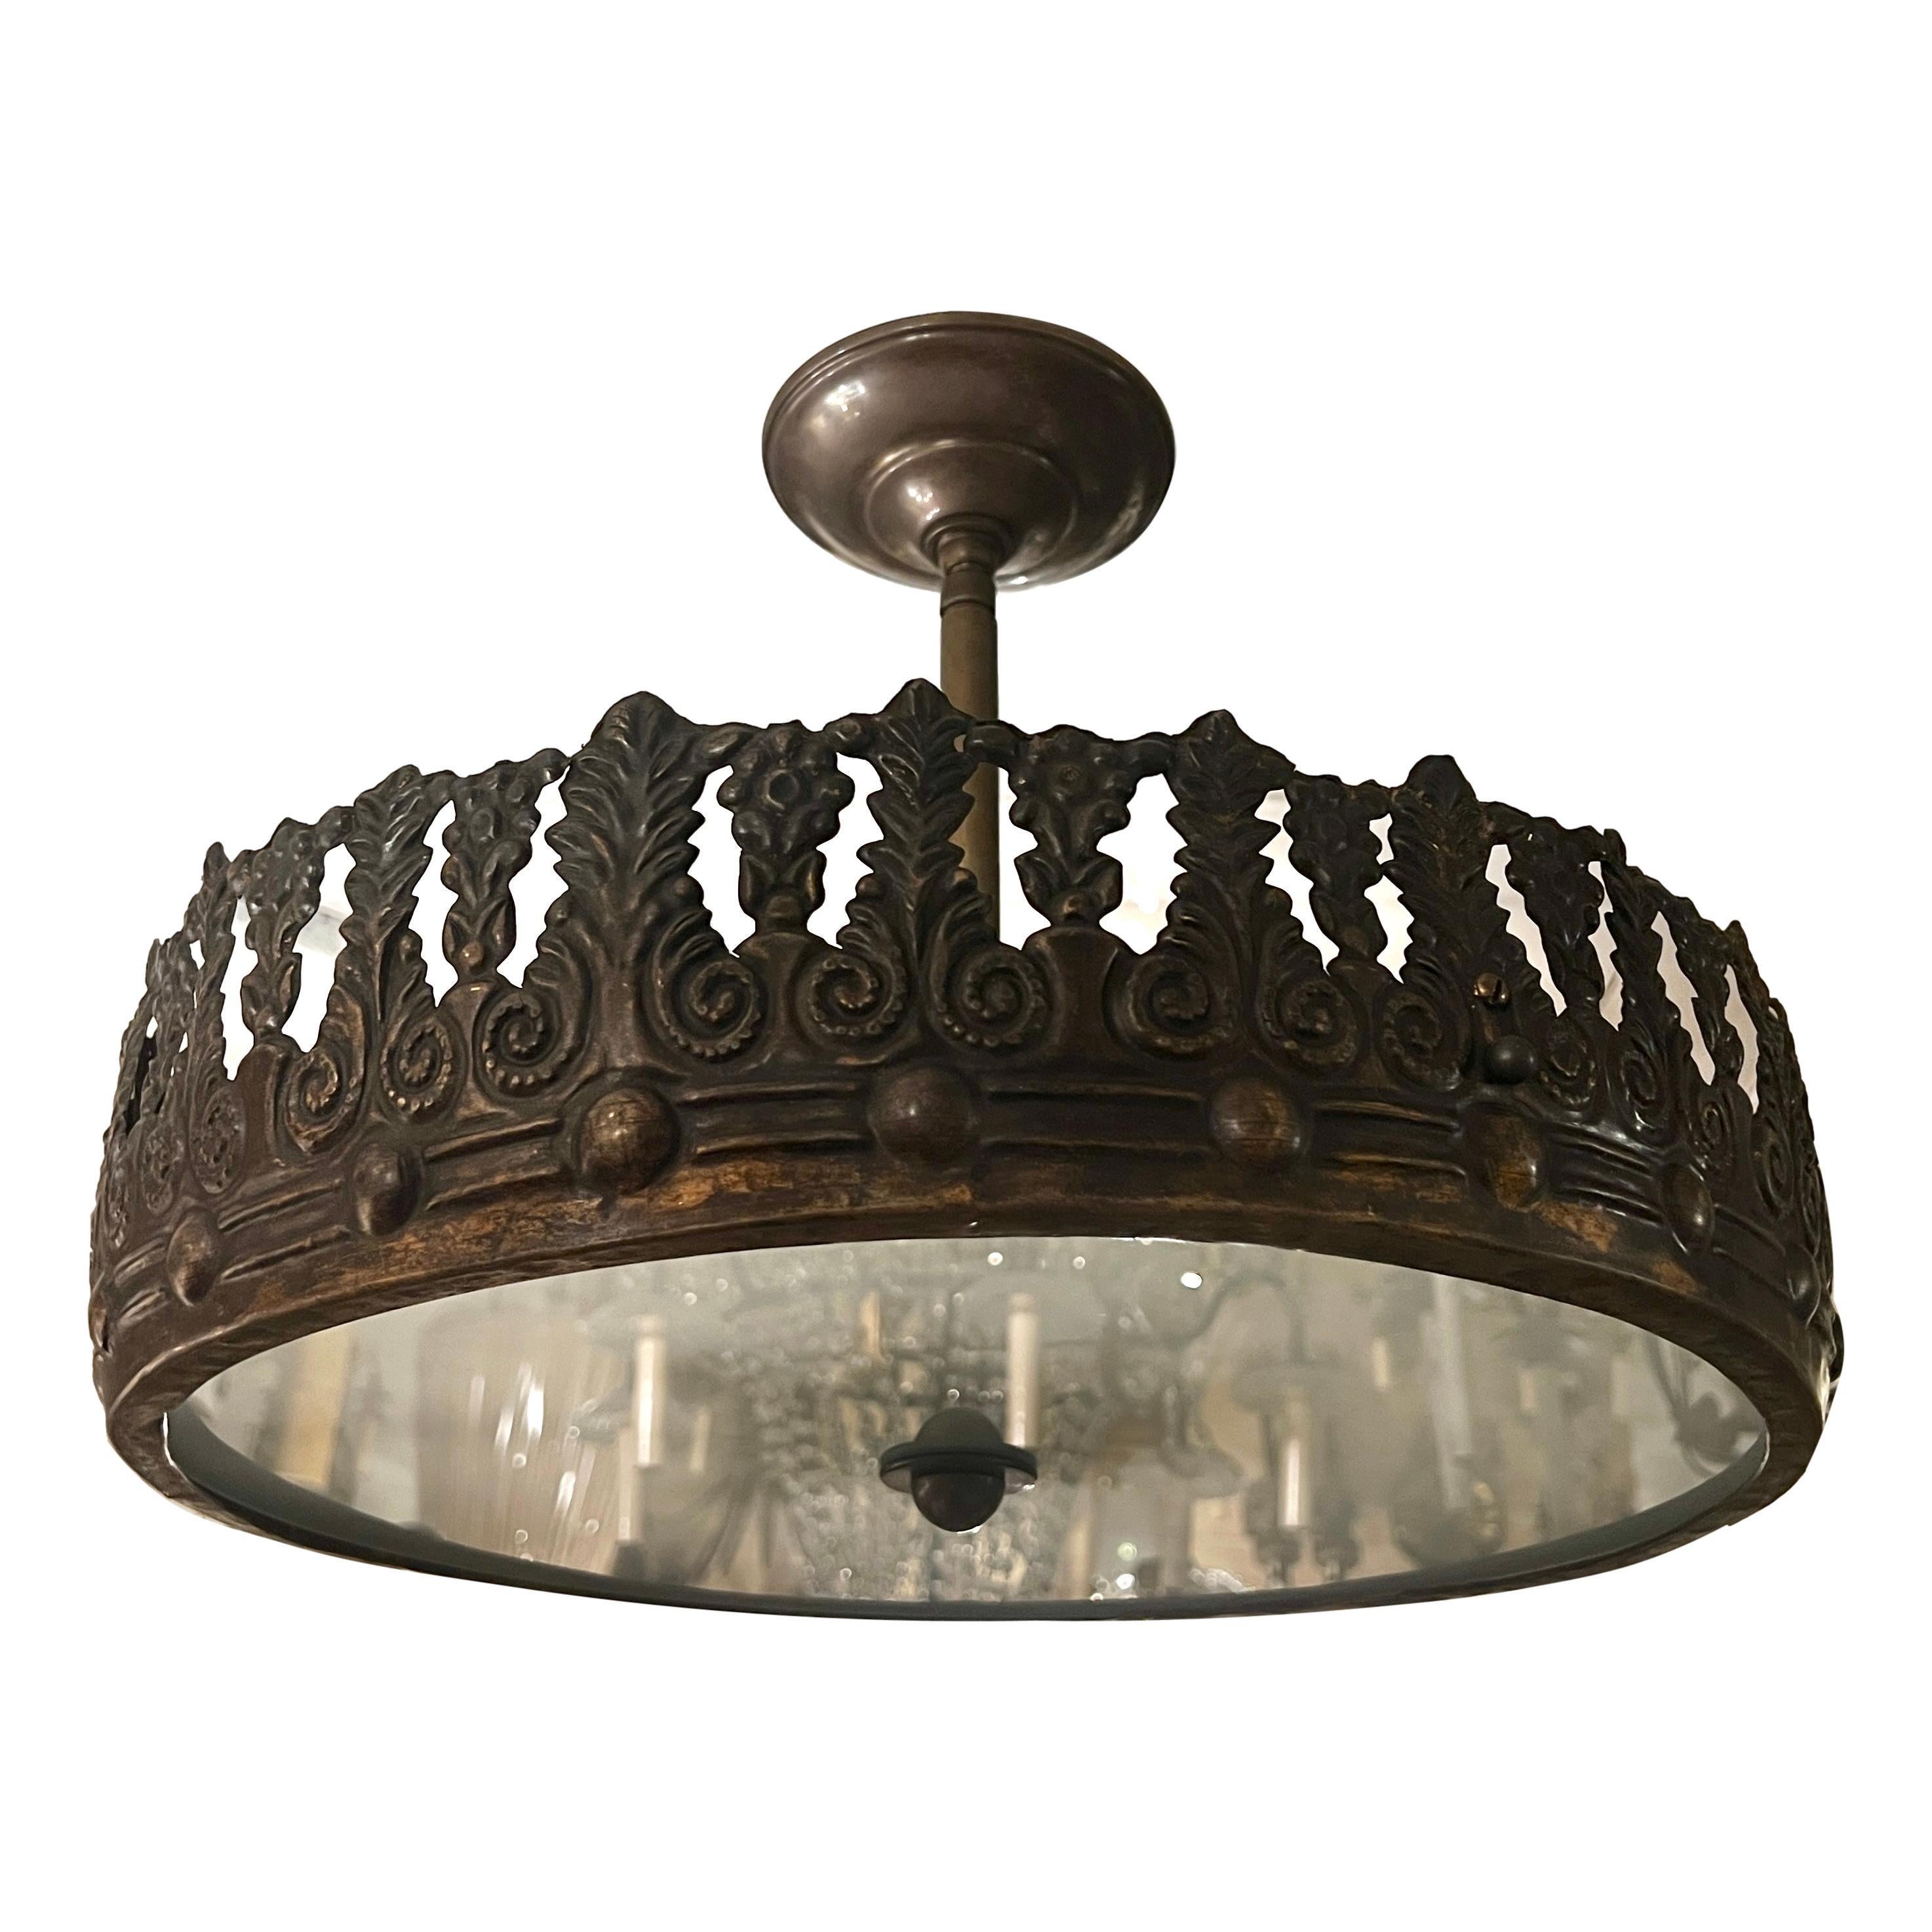 Set of Pendant Light Fixtures, Sold Individually